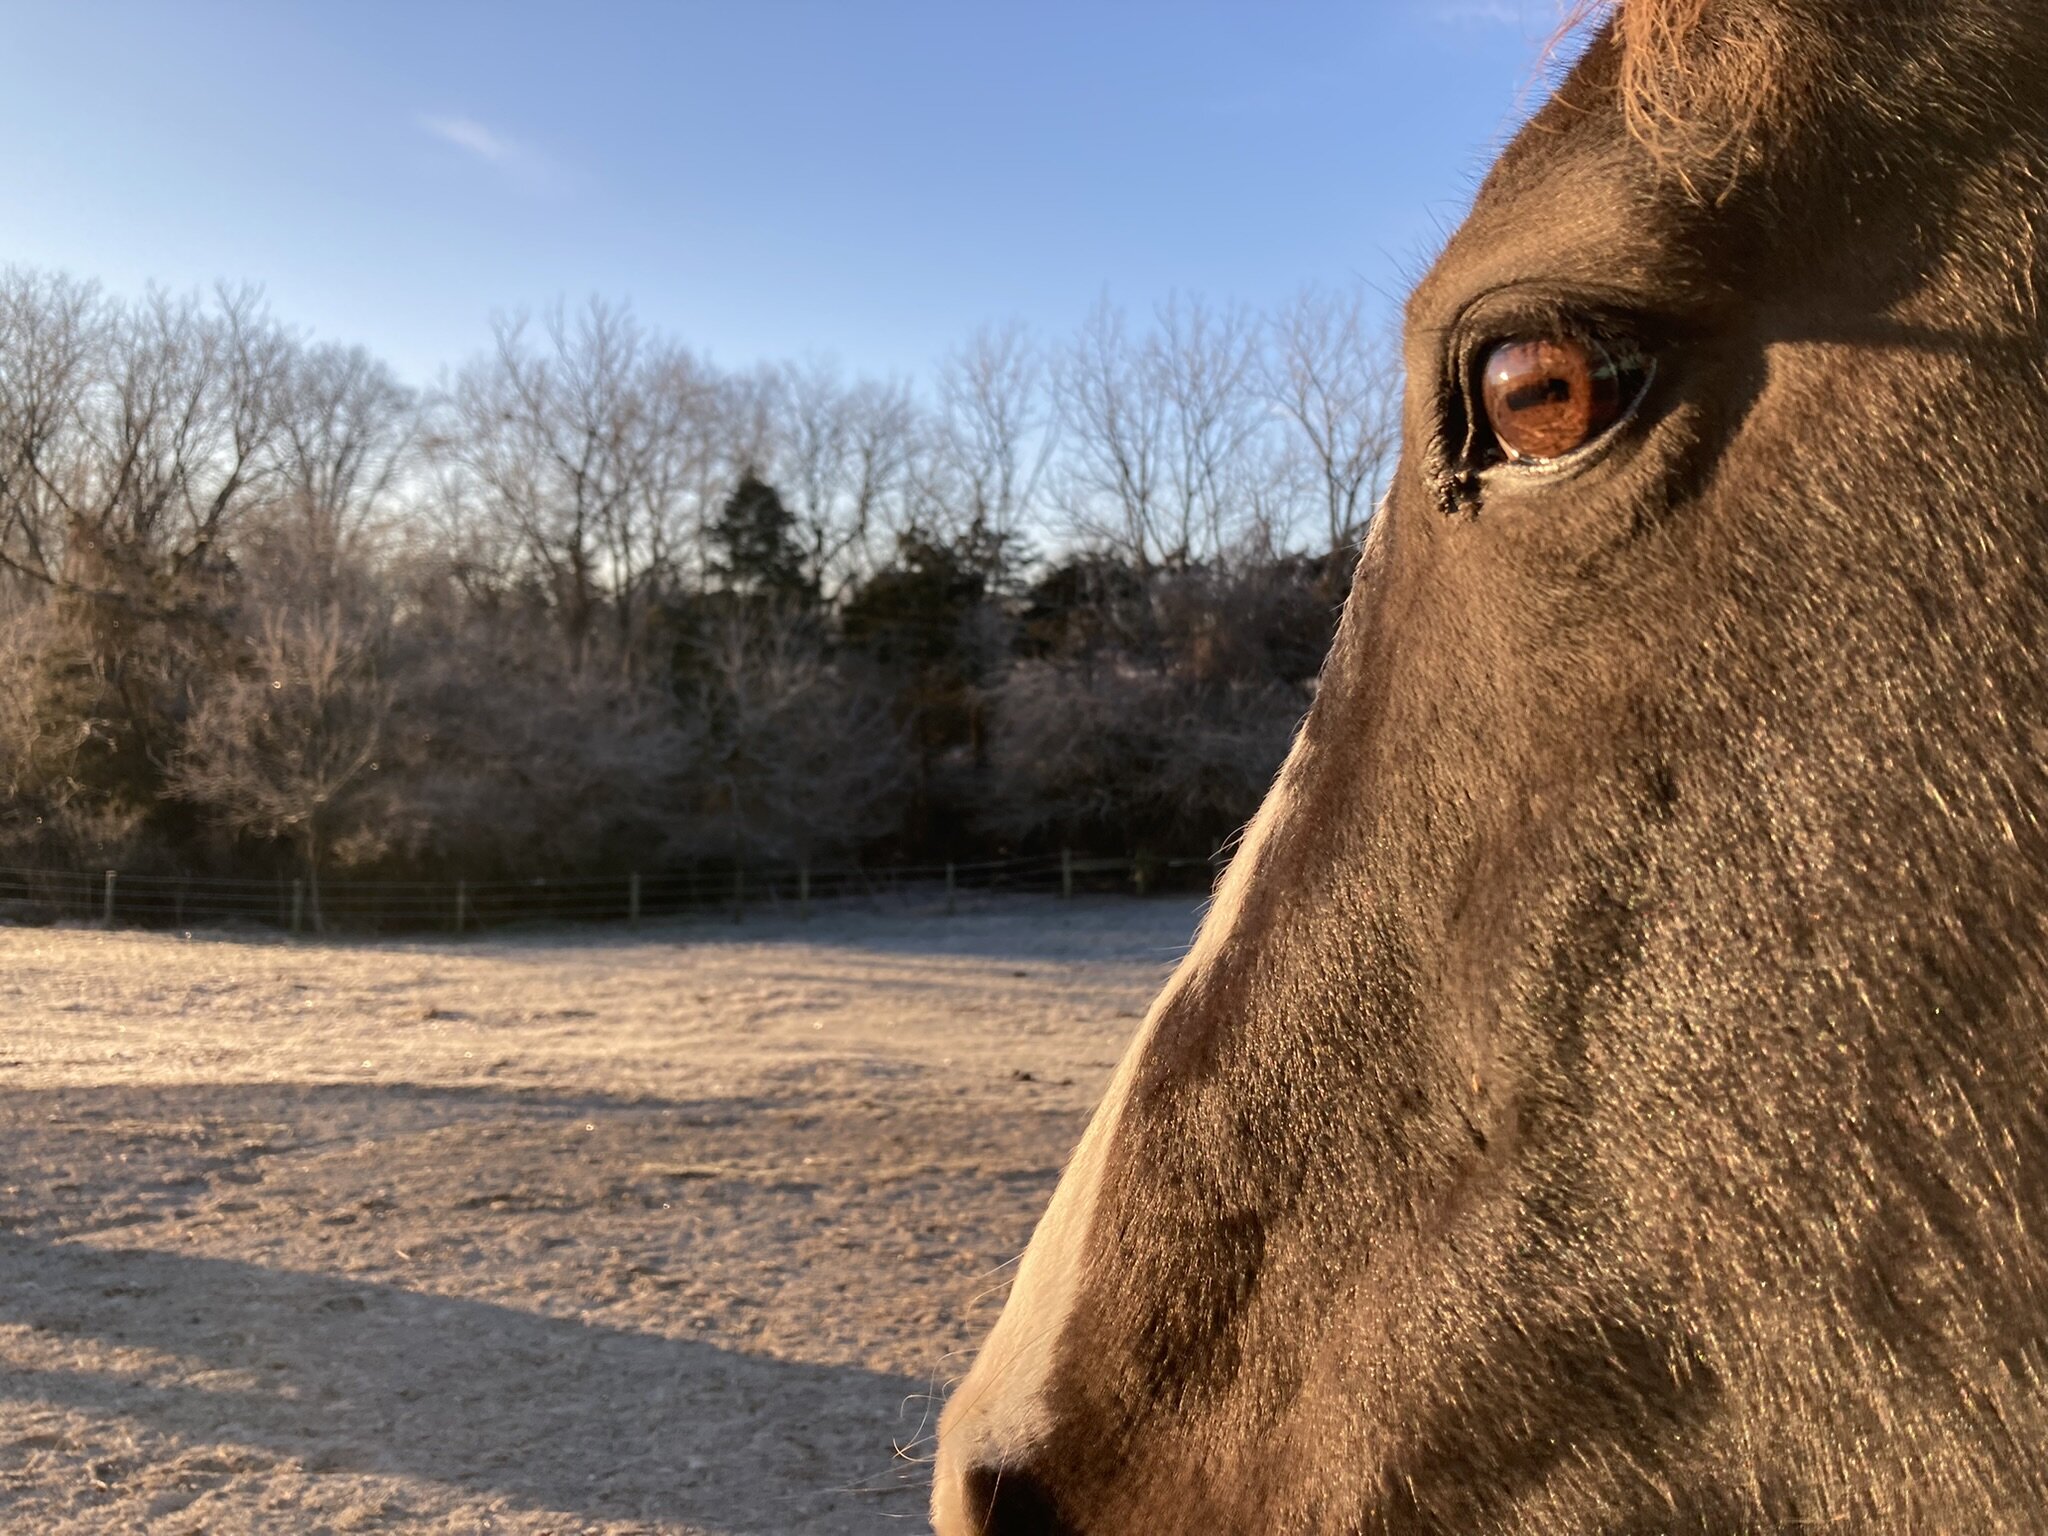 It's chilly this morning! We loved seeing all of the comments on the picture of Lance on Thursday - keep an eye out, we have a bunch more trips down memory lane planned 🐴